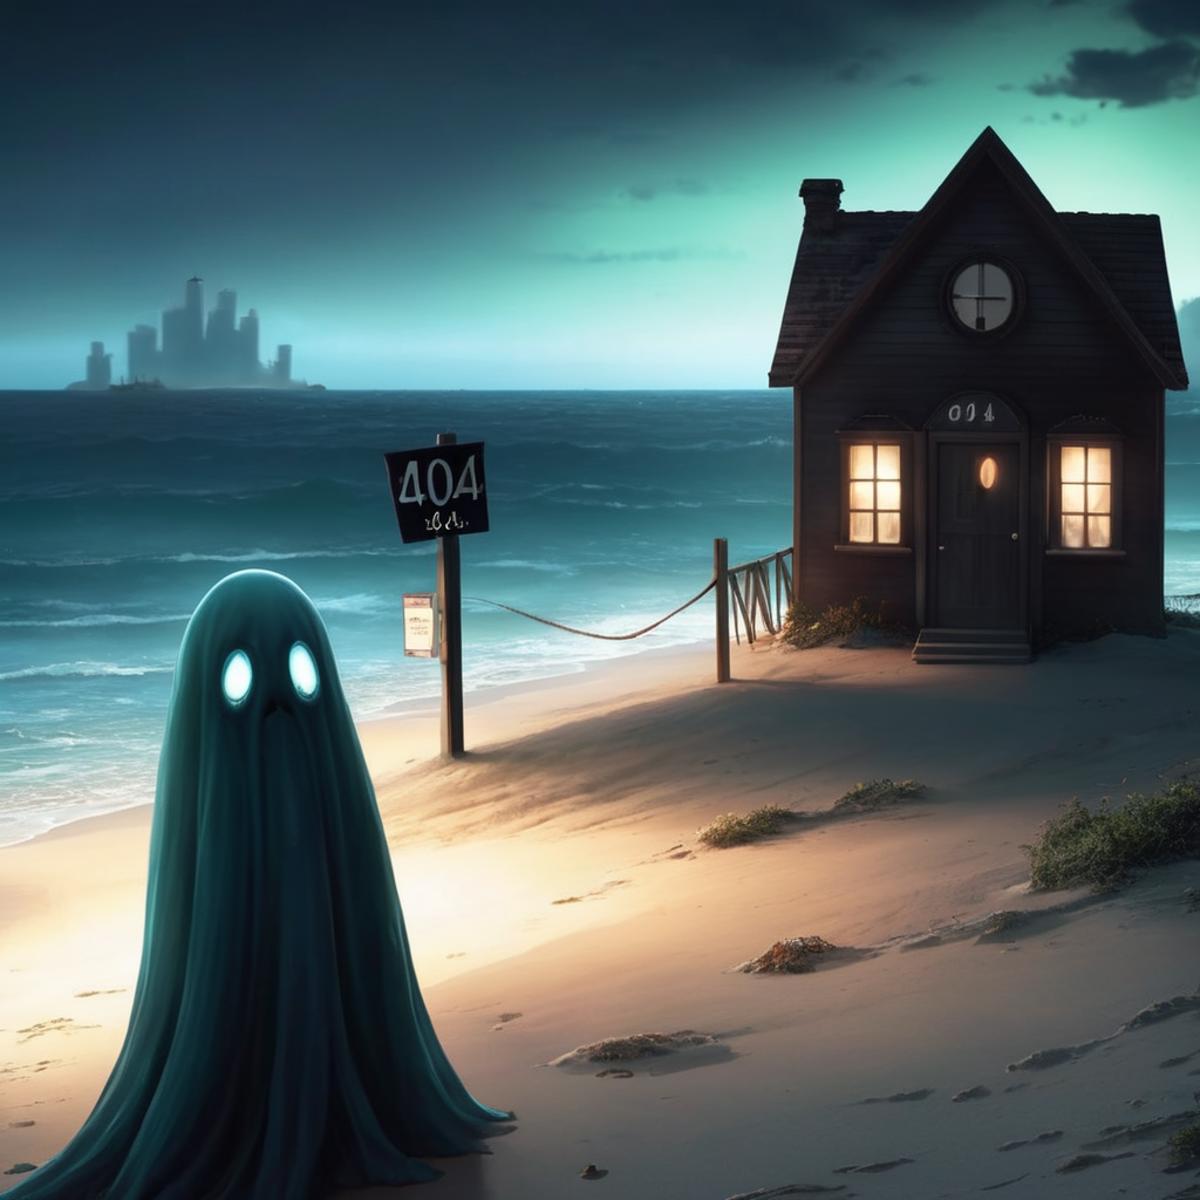 A ghost standing on a beach next to a house with the number 040 on it.